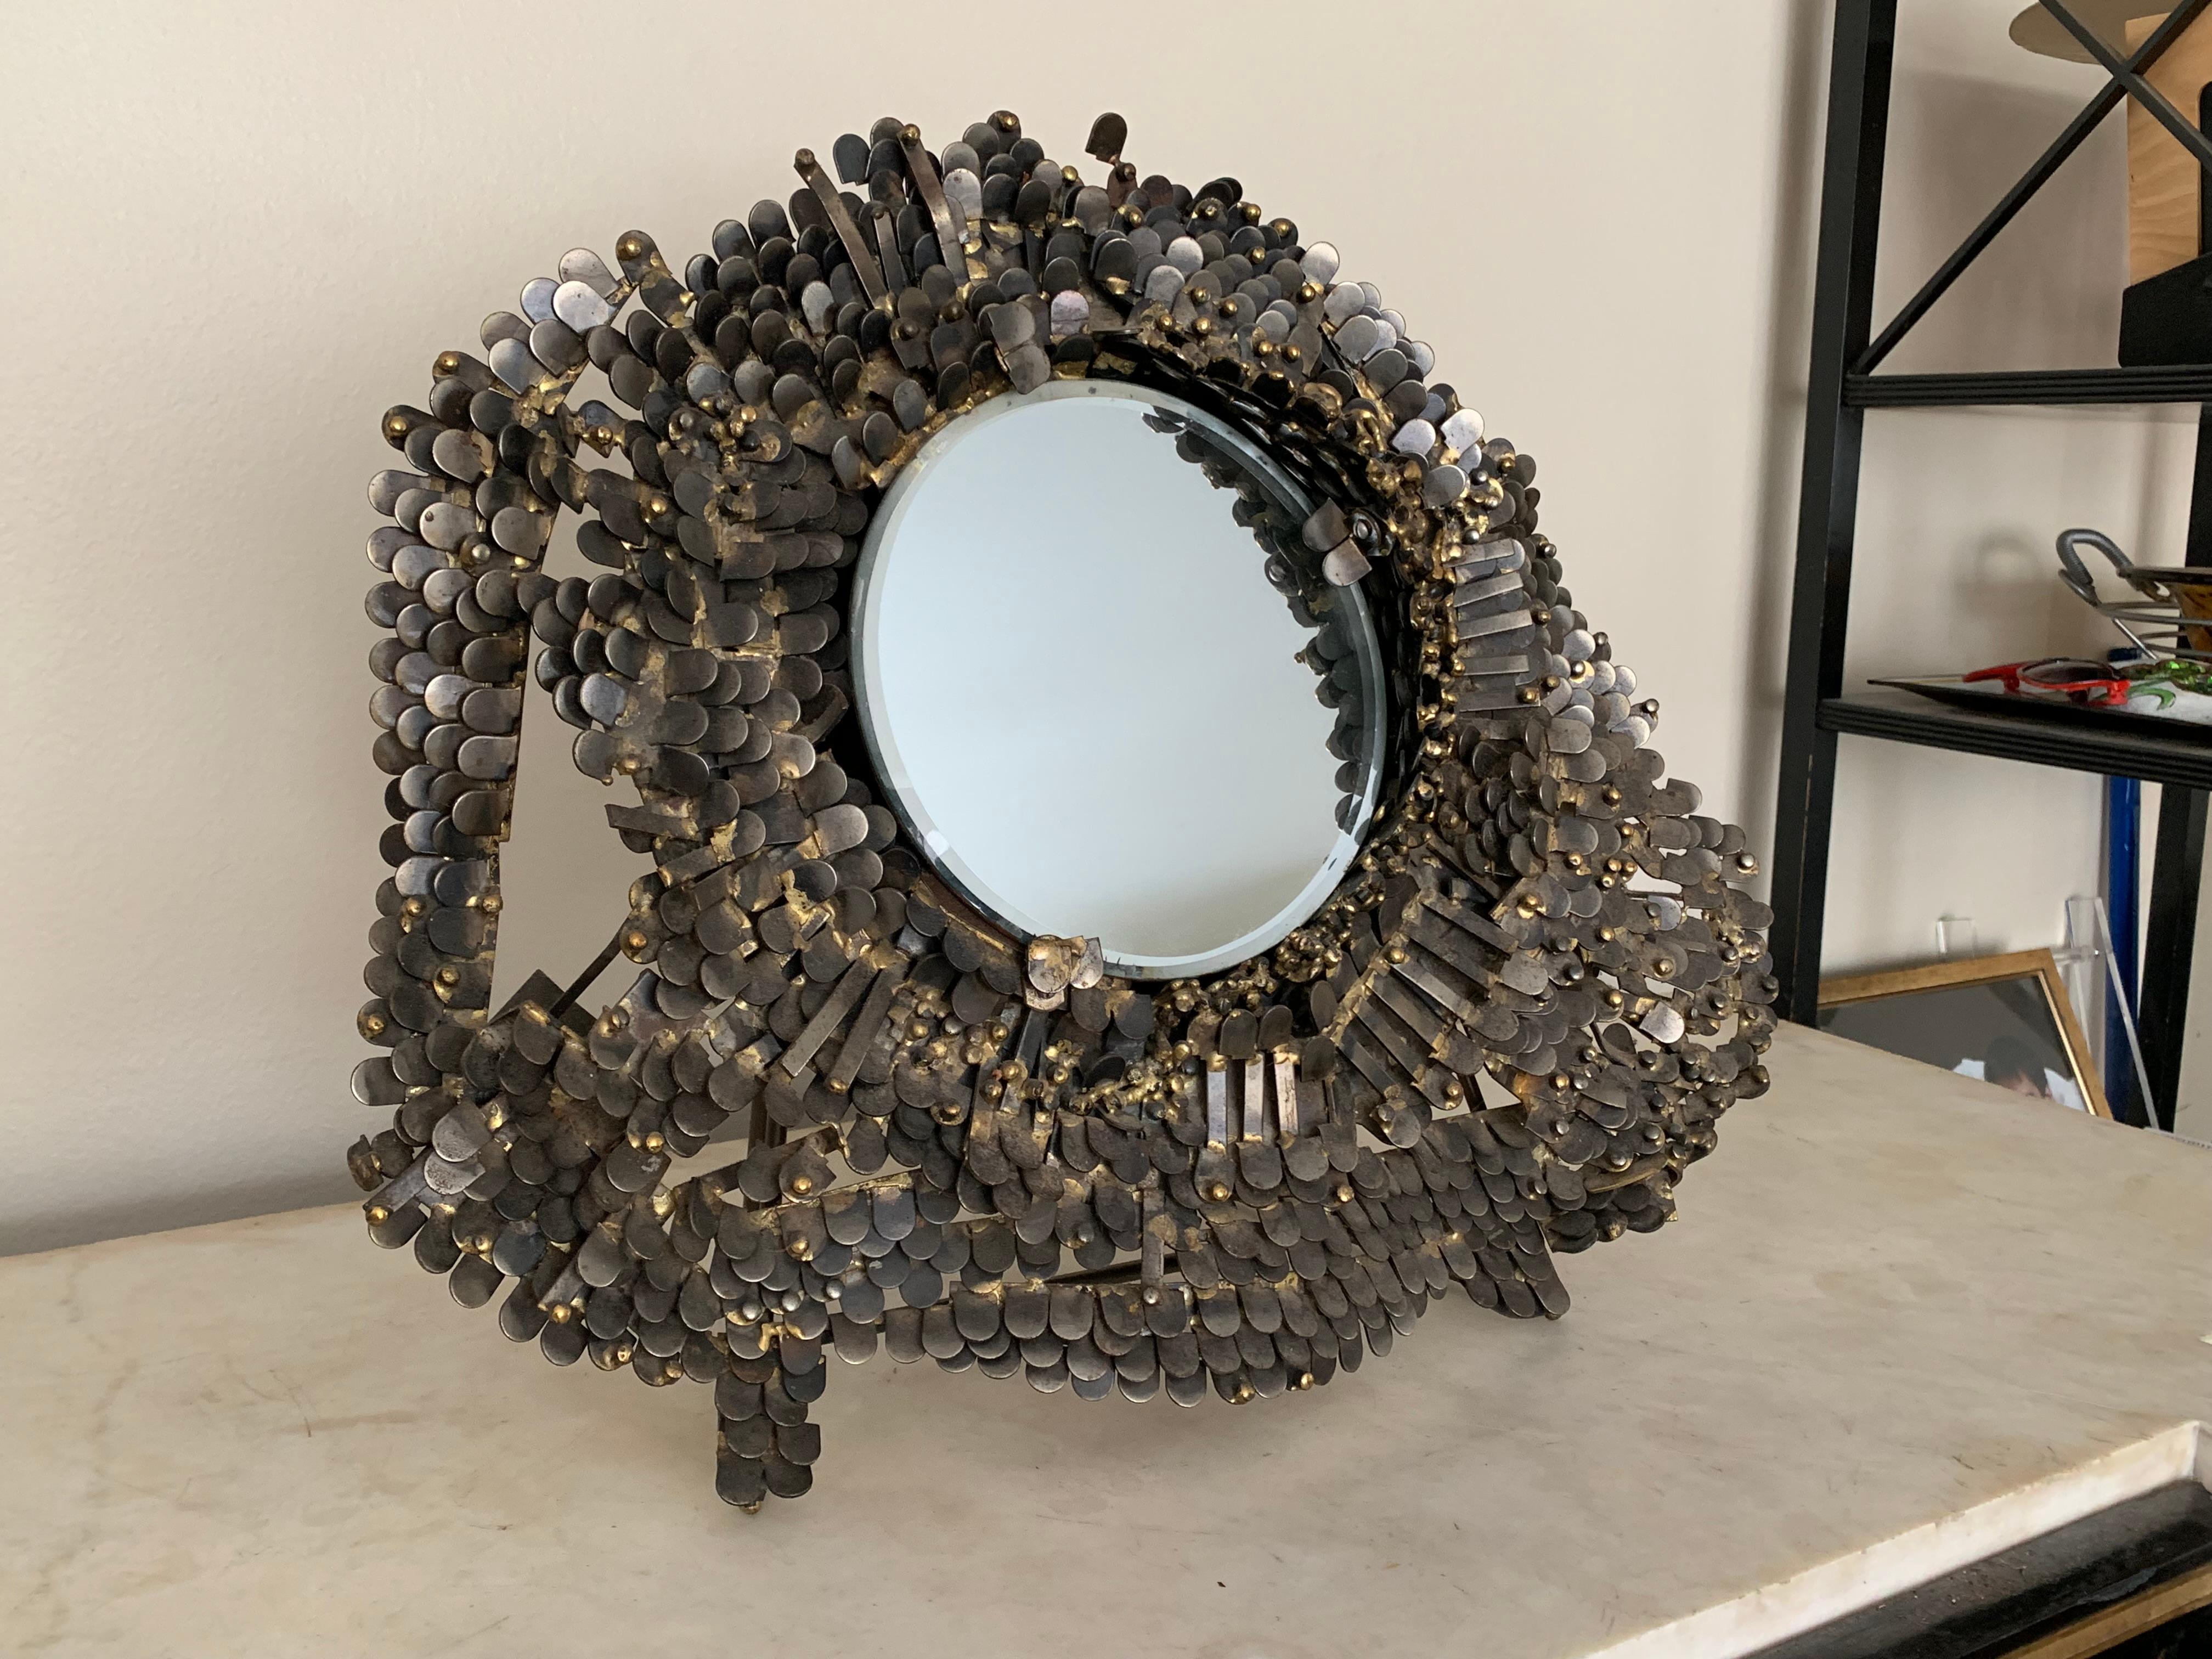 Vintage Brutalist mirror Richard Bitterman, tabletop or wall hung
incredible detail
elegant piece that will stop you in your tracks.
Piece has hardware to hang and also a metal stand to place on tabletop, mantel (fireplace), cabinet.